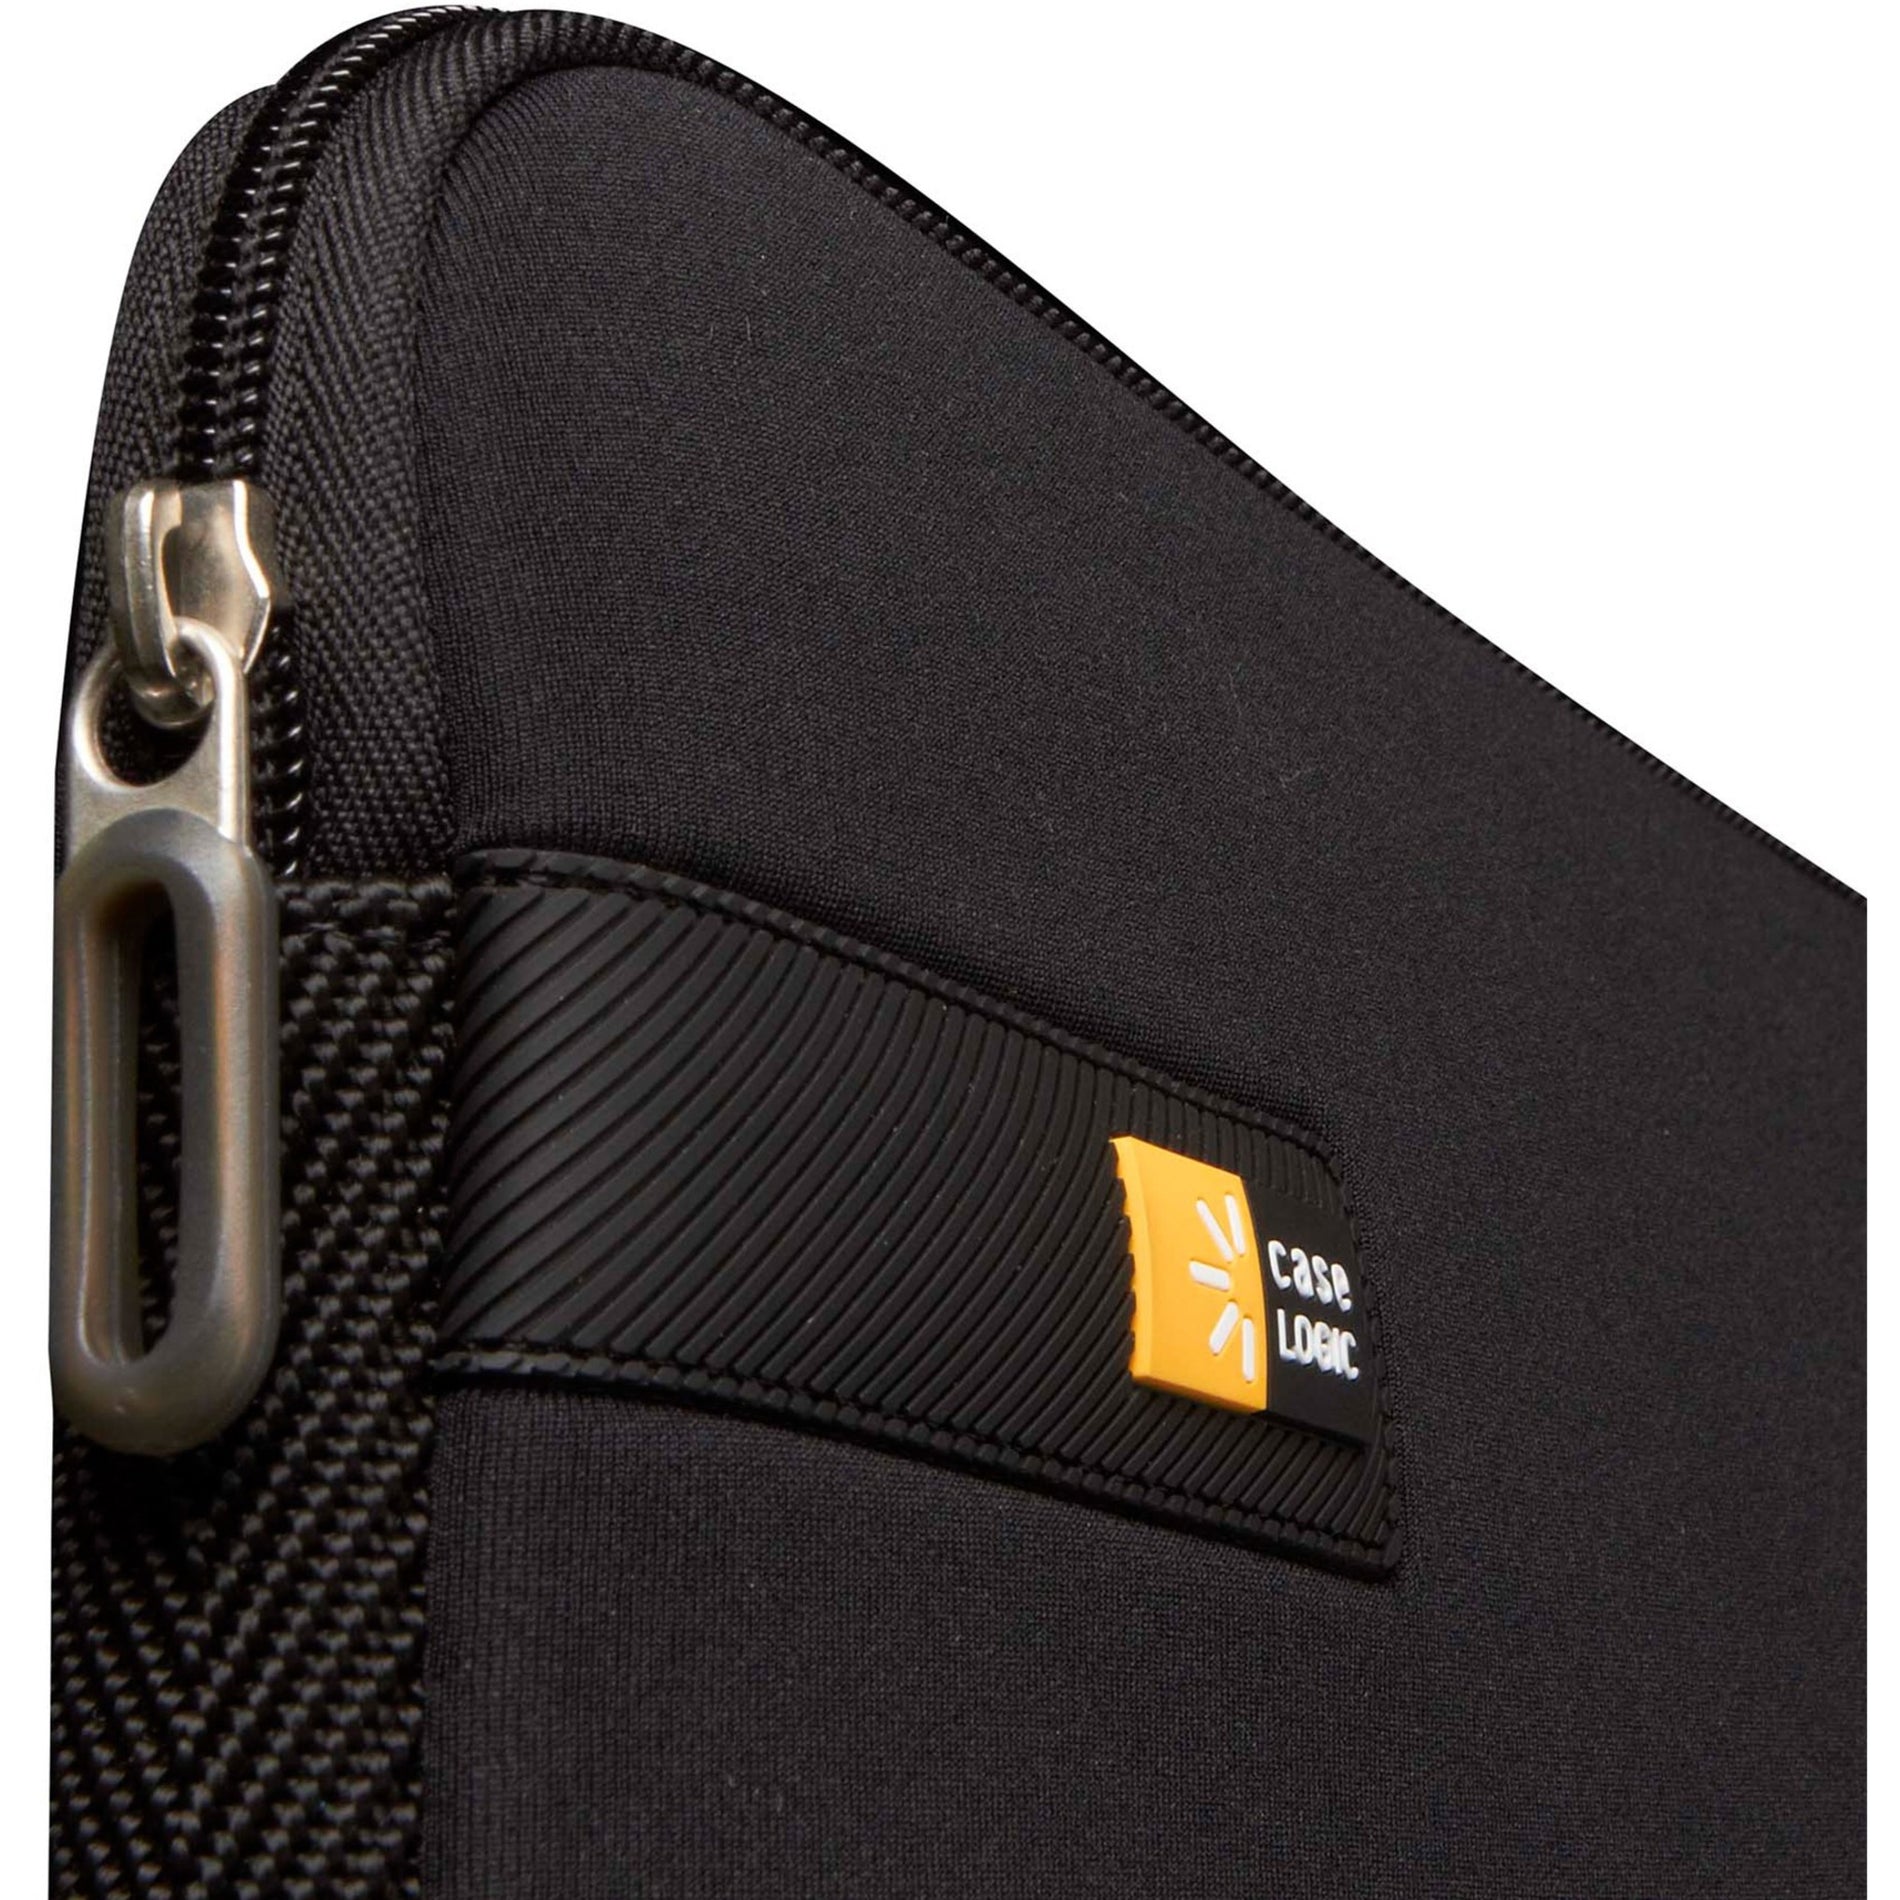 Case Logic 3201354 14" Laptop Sleeve Sleek and Protective Black Carrying Case [Discontinued]